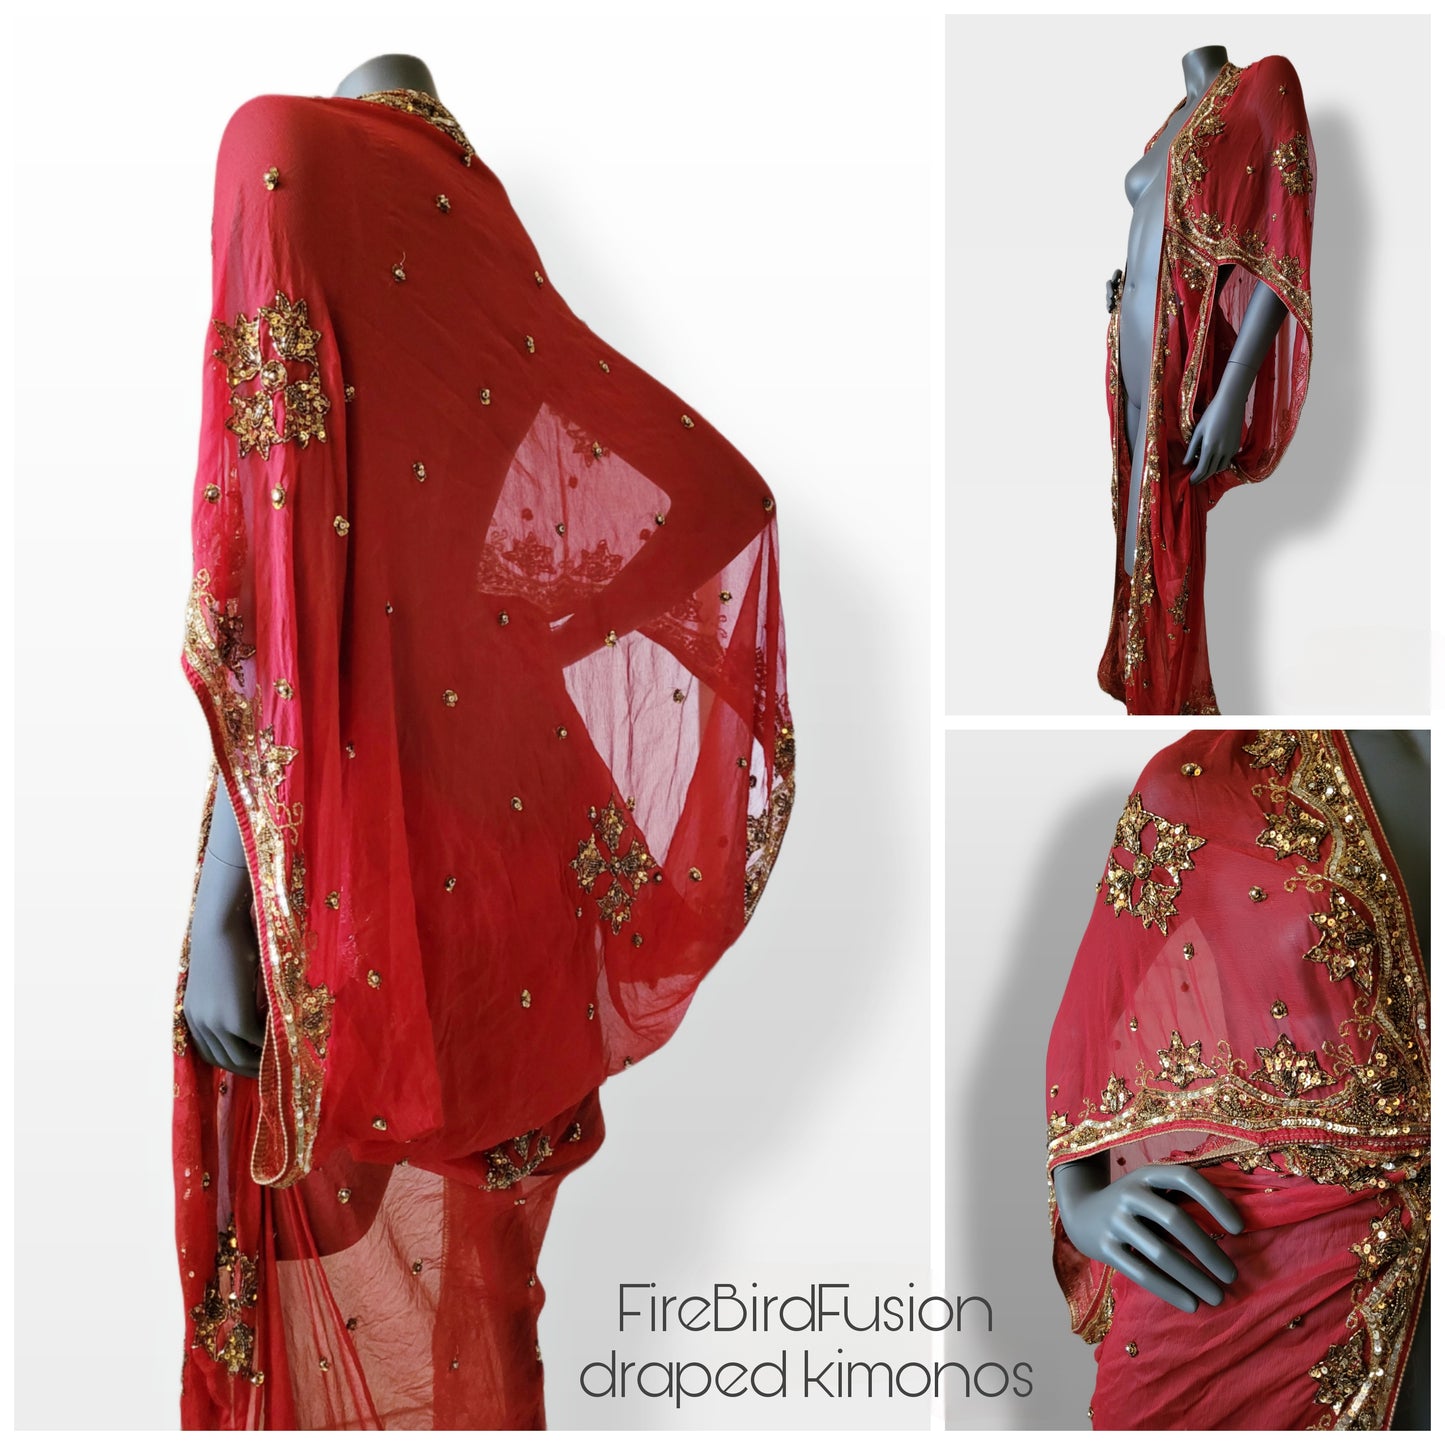 Draped kimono in red with elaborated hand embrodery in gold (M-L)